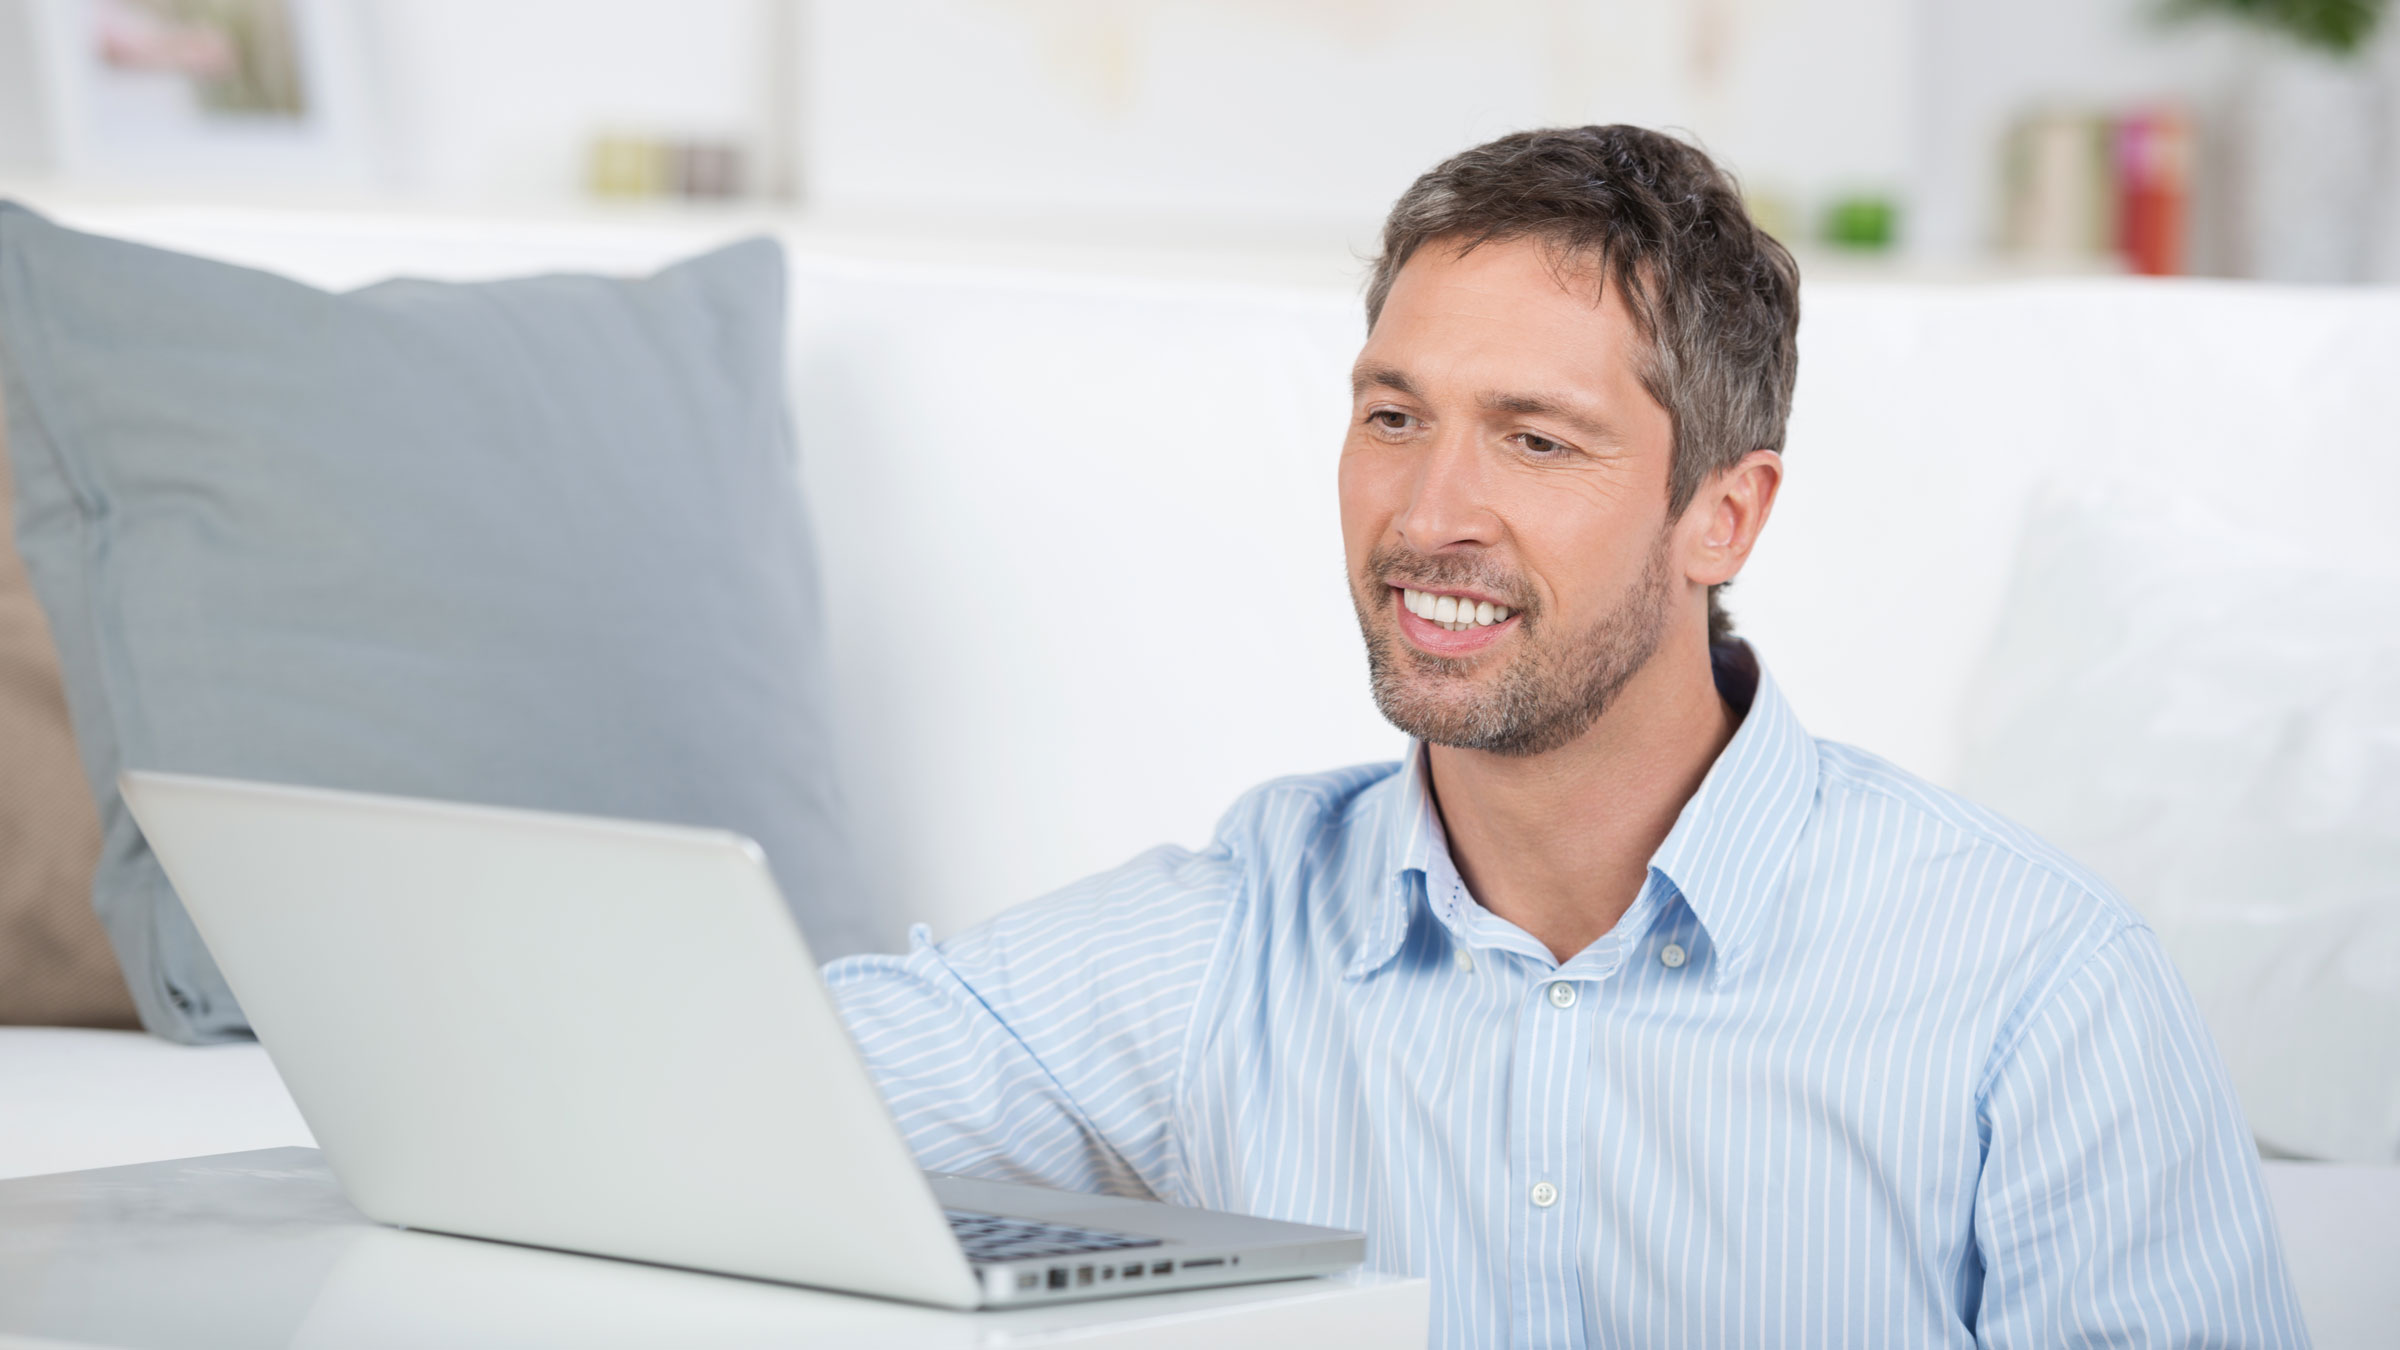 Man sitting in front of laptop